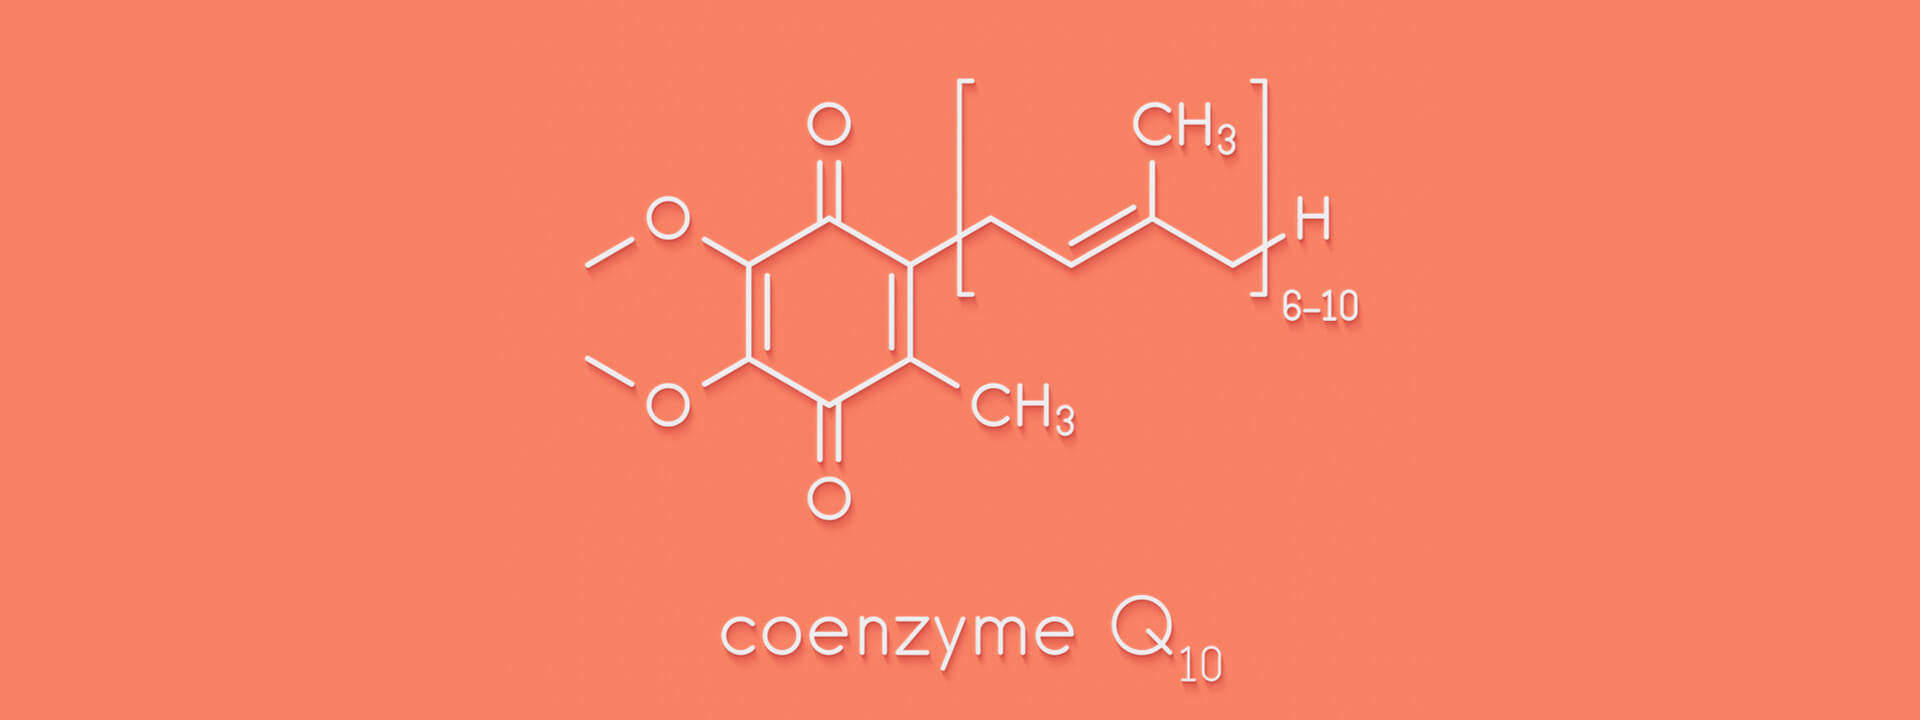 Research Supporting the Heart Health Benefits of CoQ10